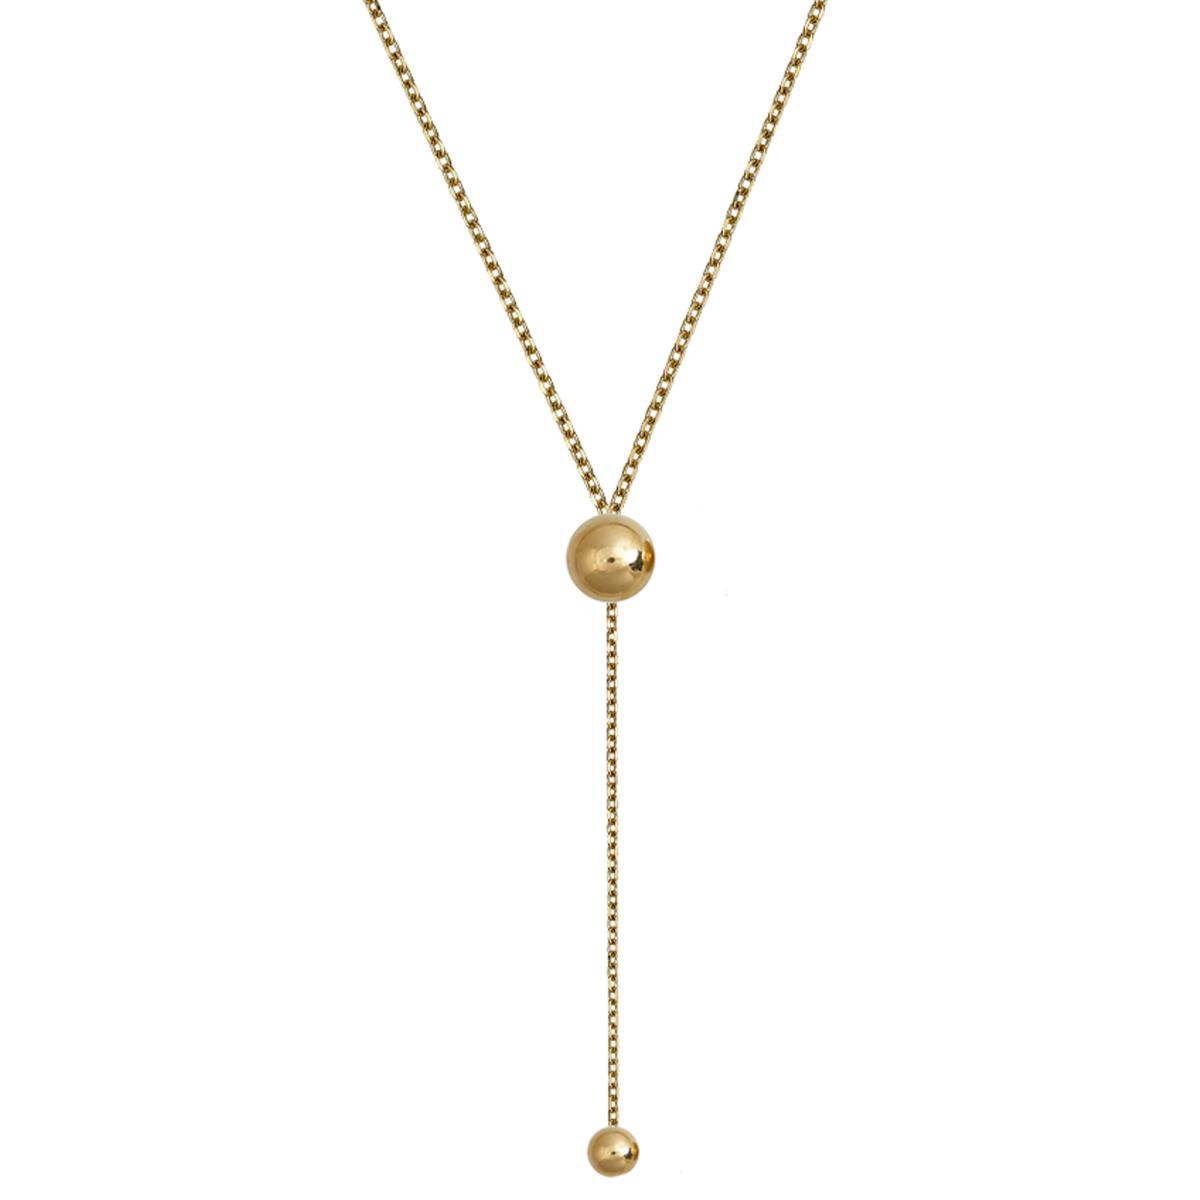 14K Yellow Gold Dangling Ball & Chain 17" Necklace